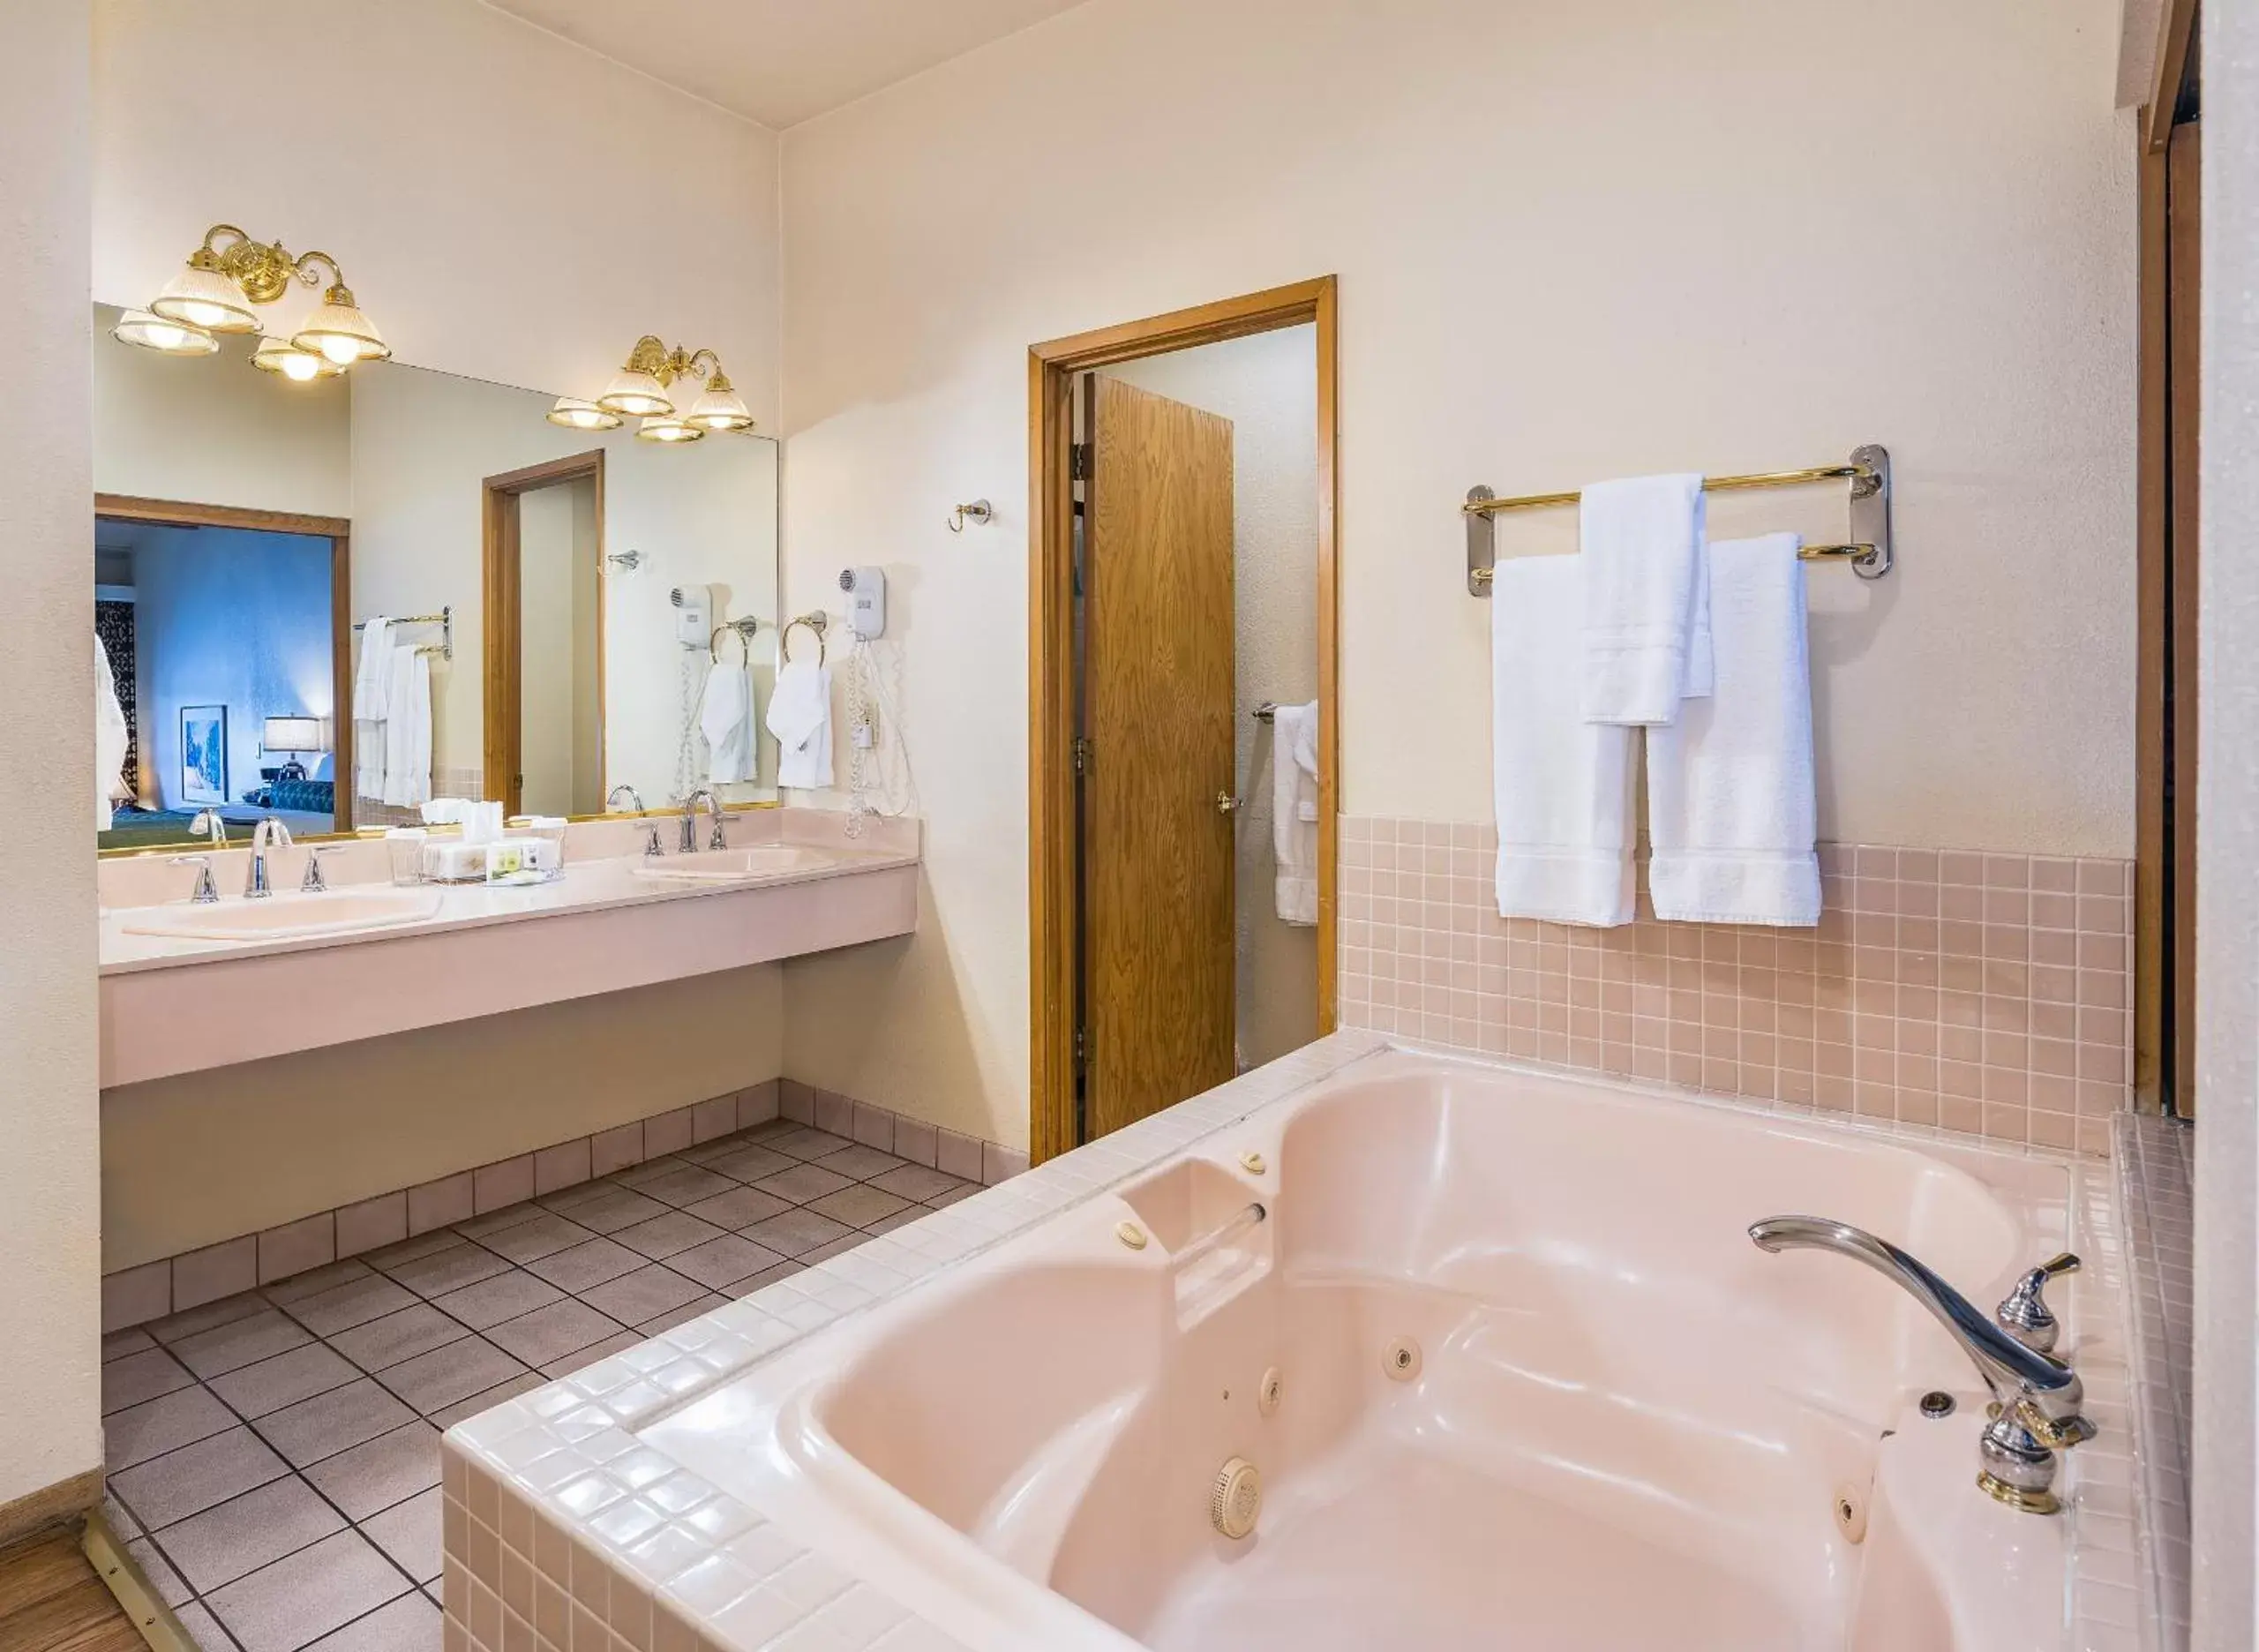 Bathroom in The Pines Resort & Conference Center